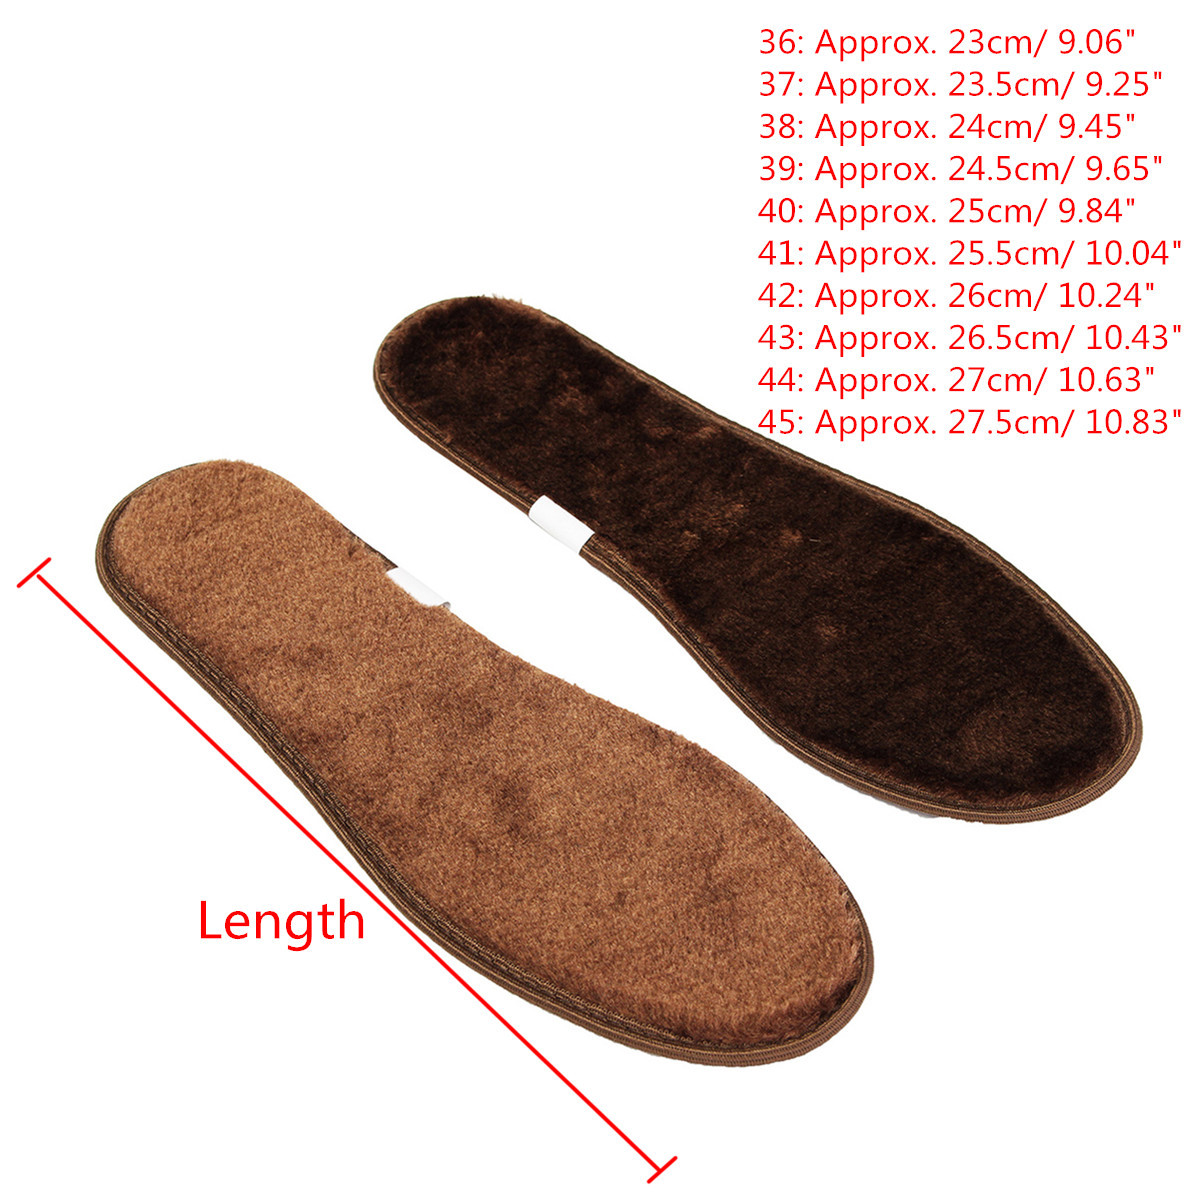 1-Pair-Unisex-Bamboo-Carbon-Deodorant-Insoles-Pads-Inner-Soles-Winter-Warmer-1111705-4